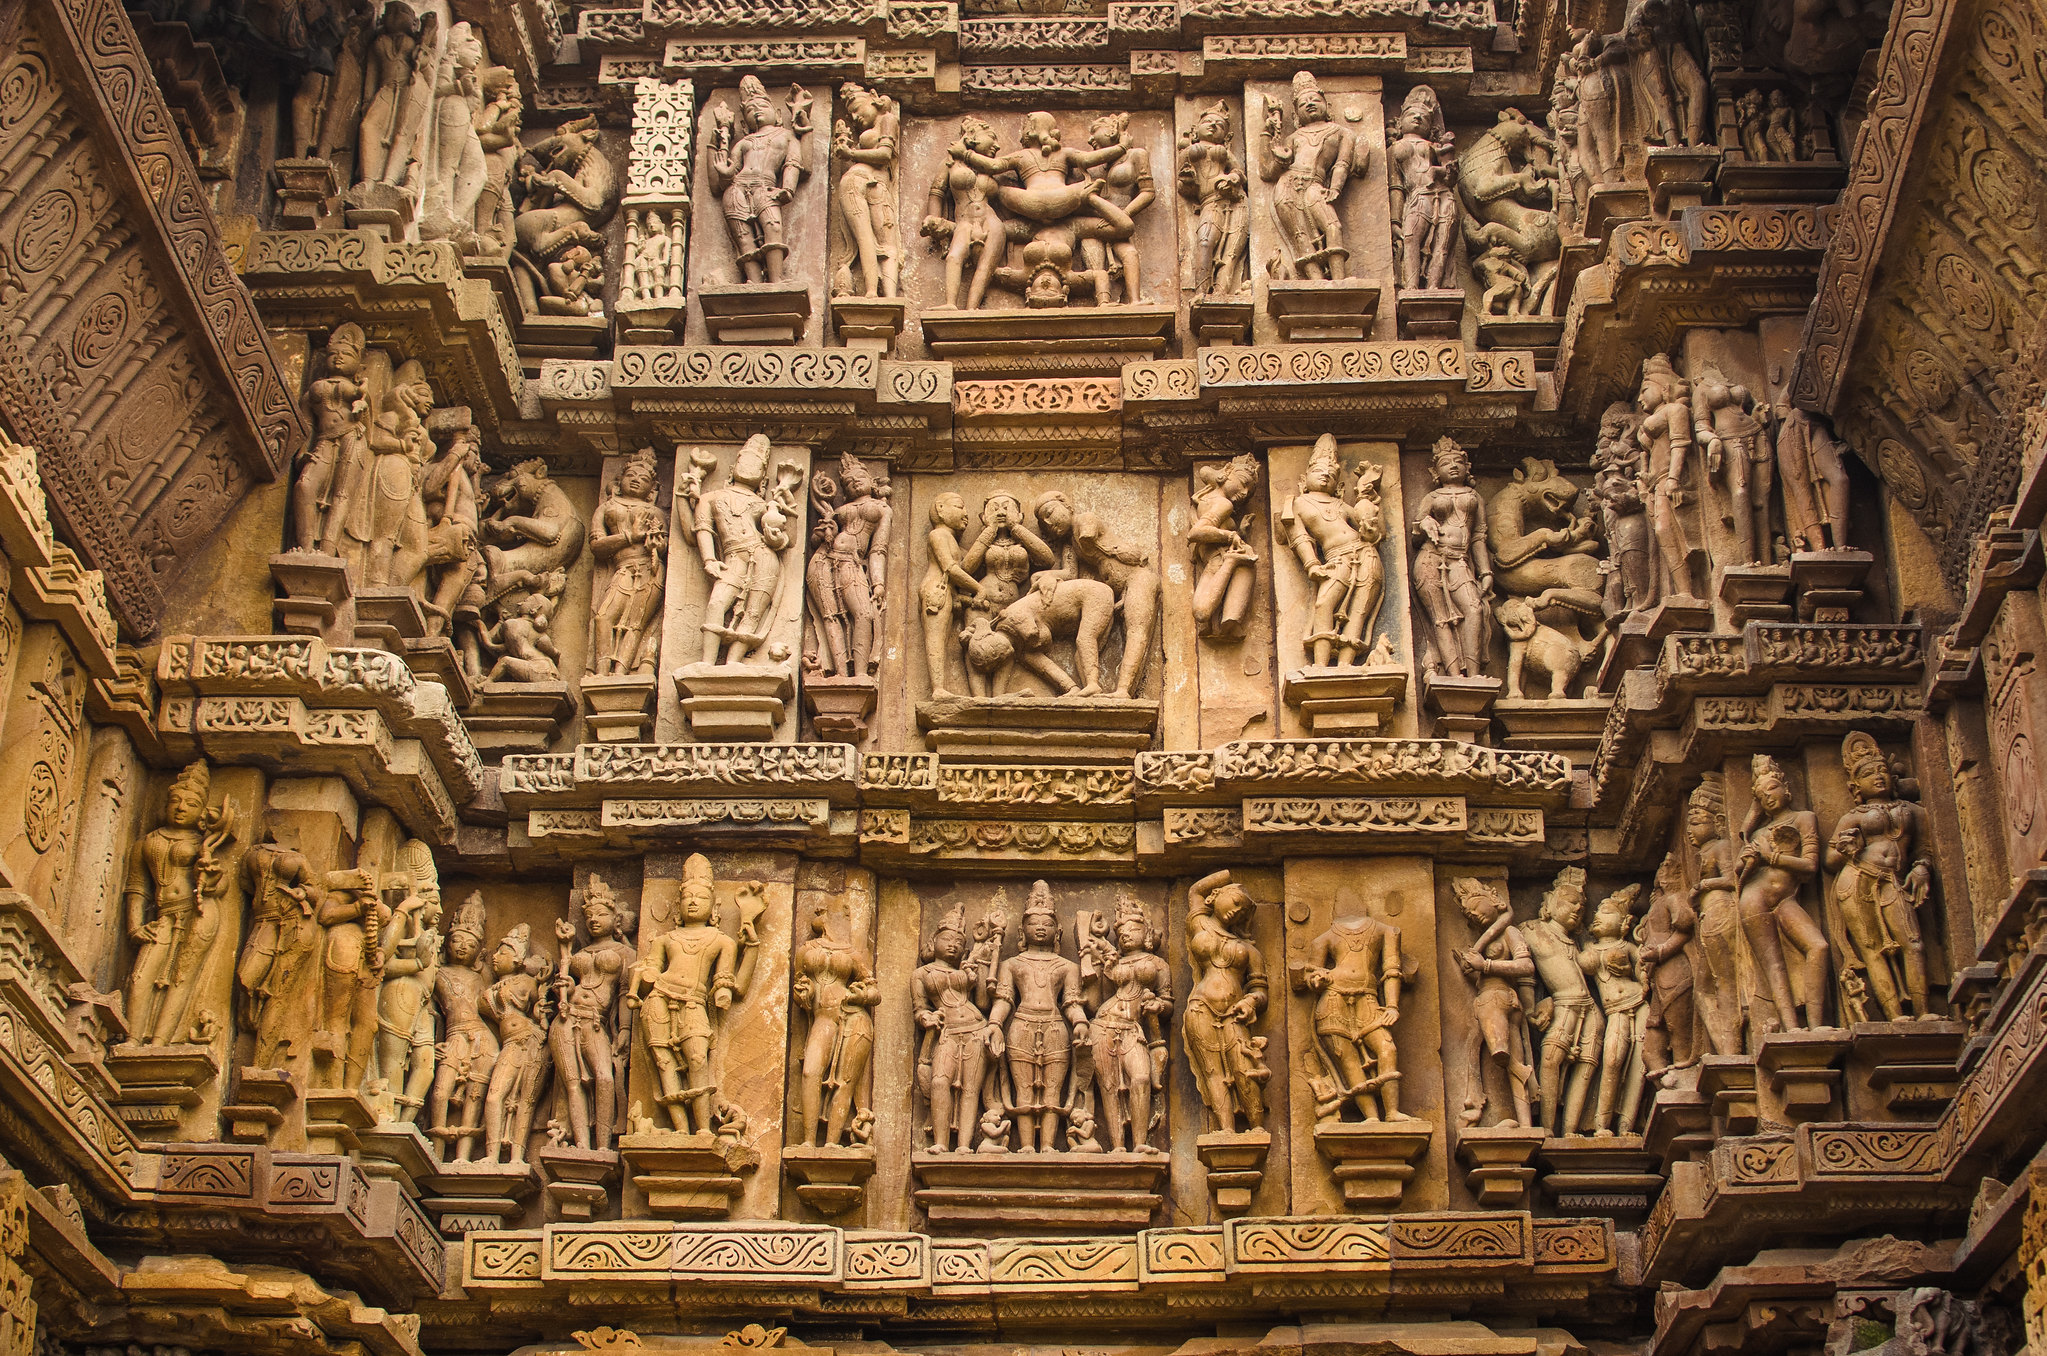 An interior wall of a temple is heavily adorned with intricate stone carvings of Hindu deities, animals and figures in sexual union, separated by bands of decoration.